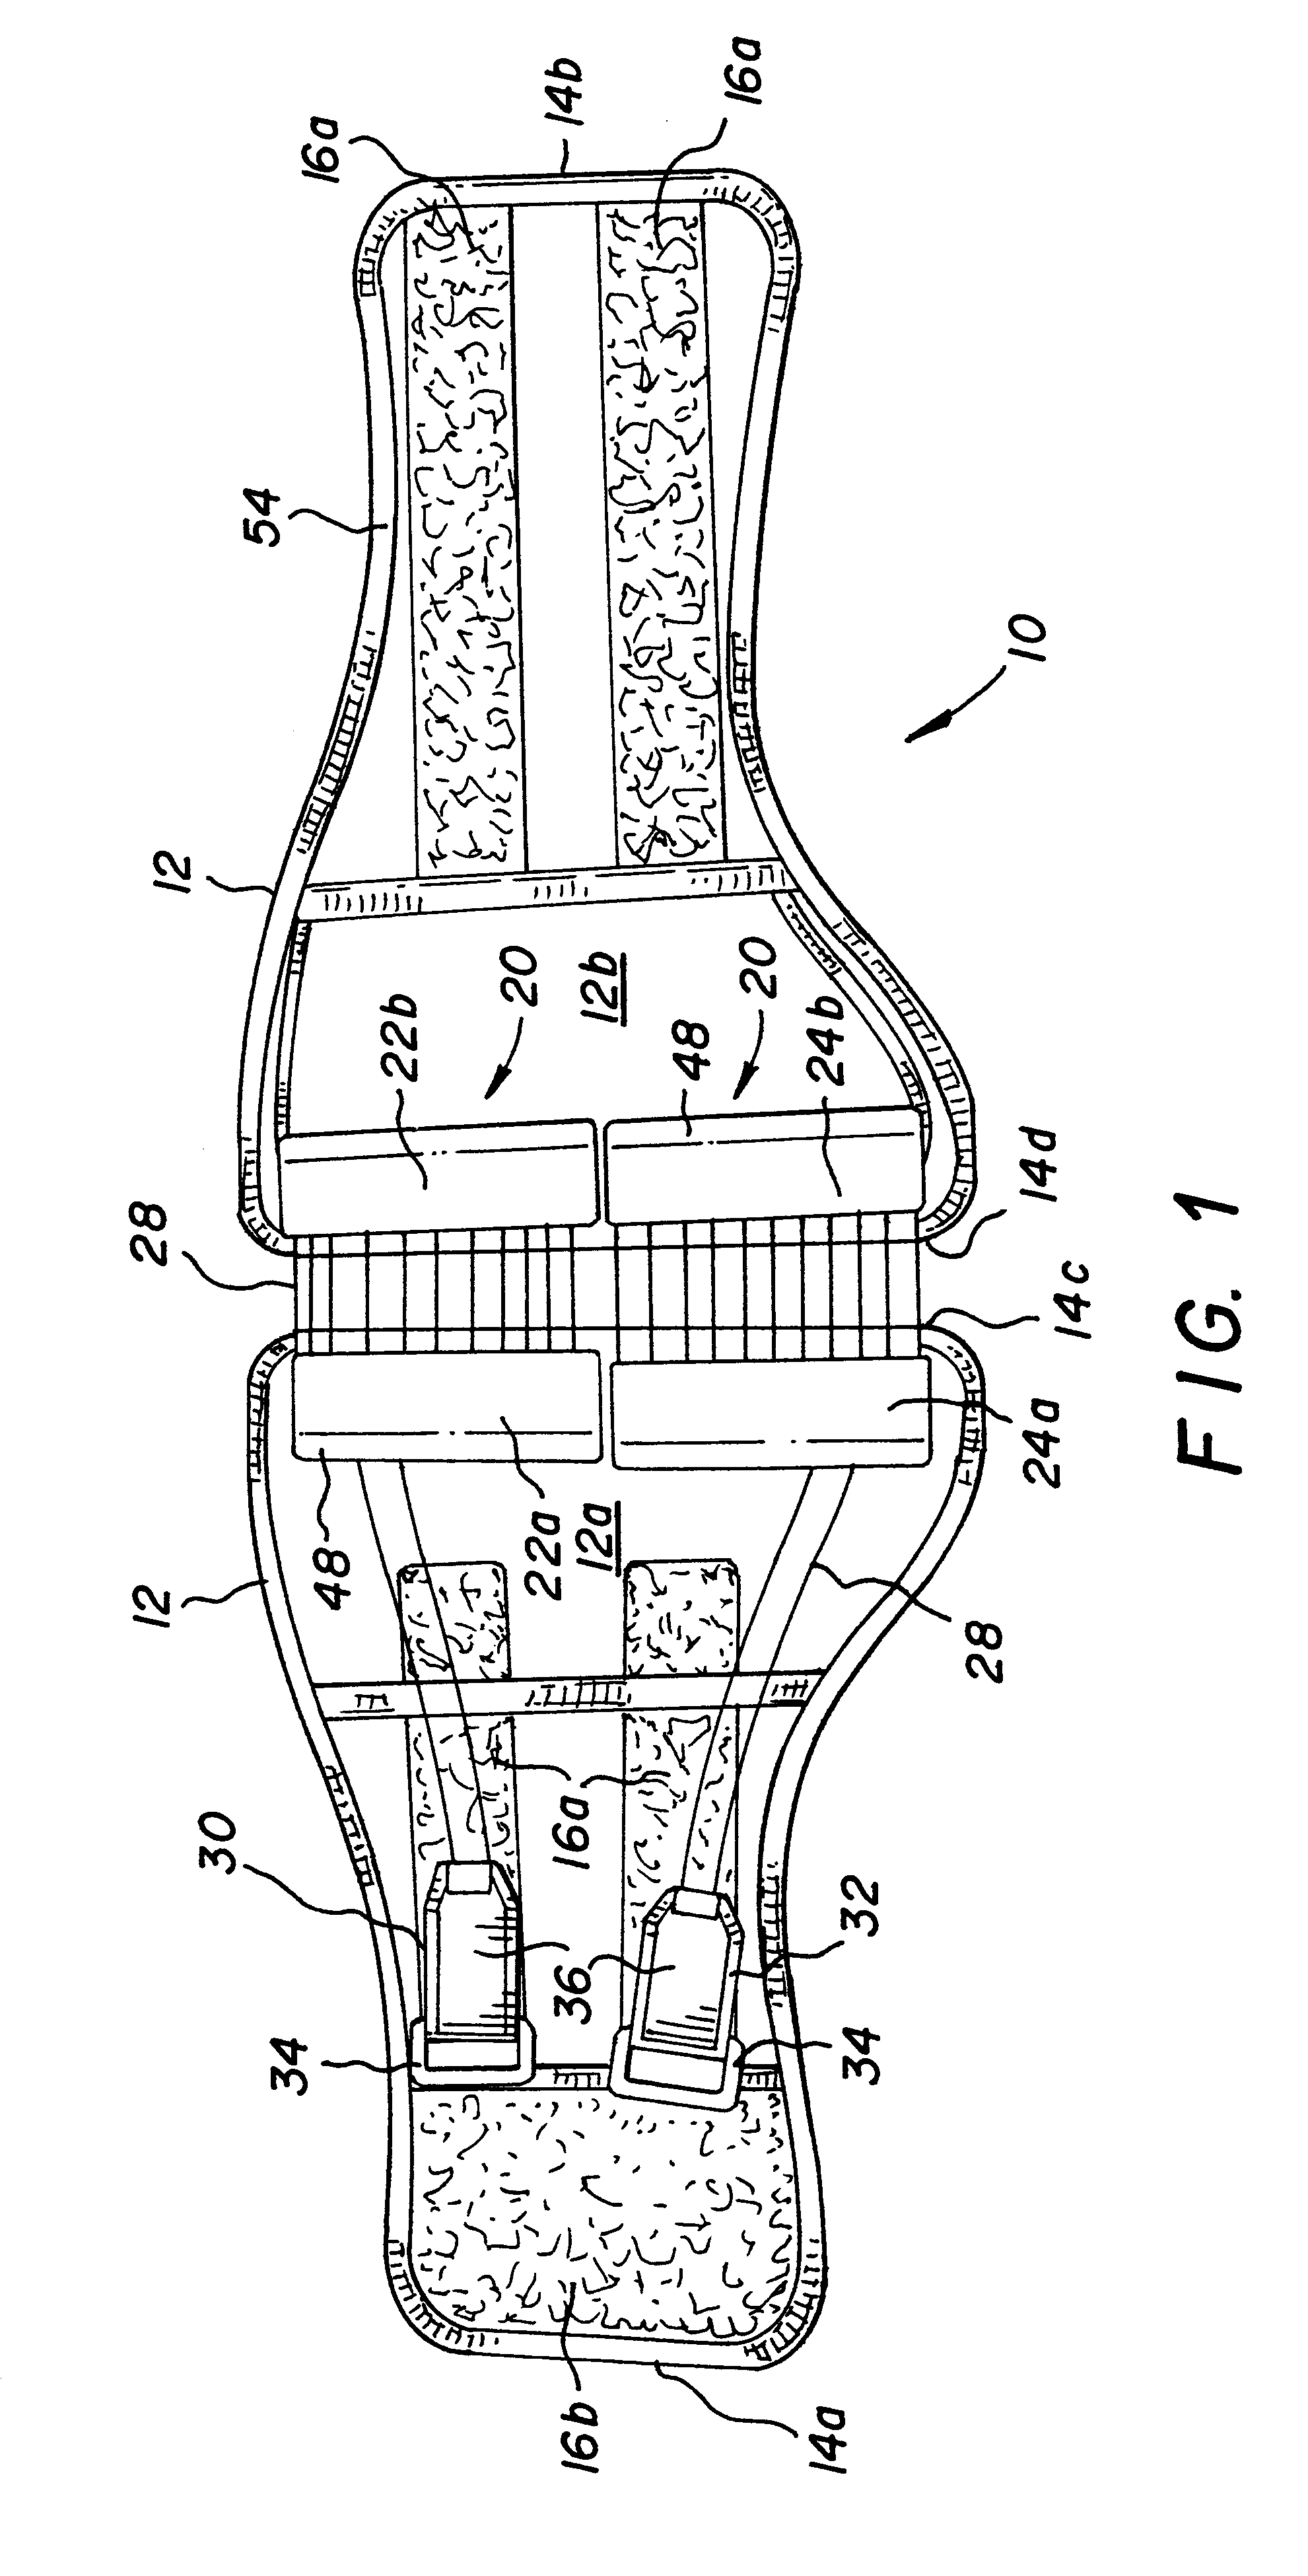 Custom fitted orthotic device